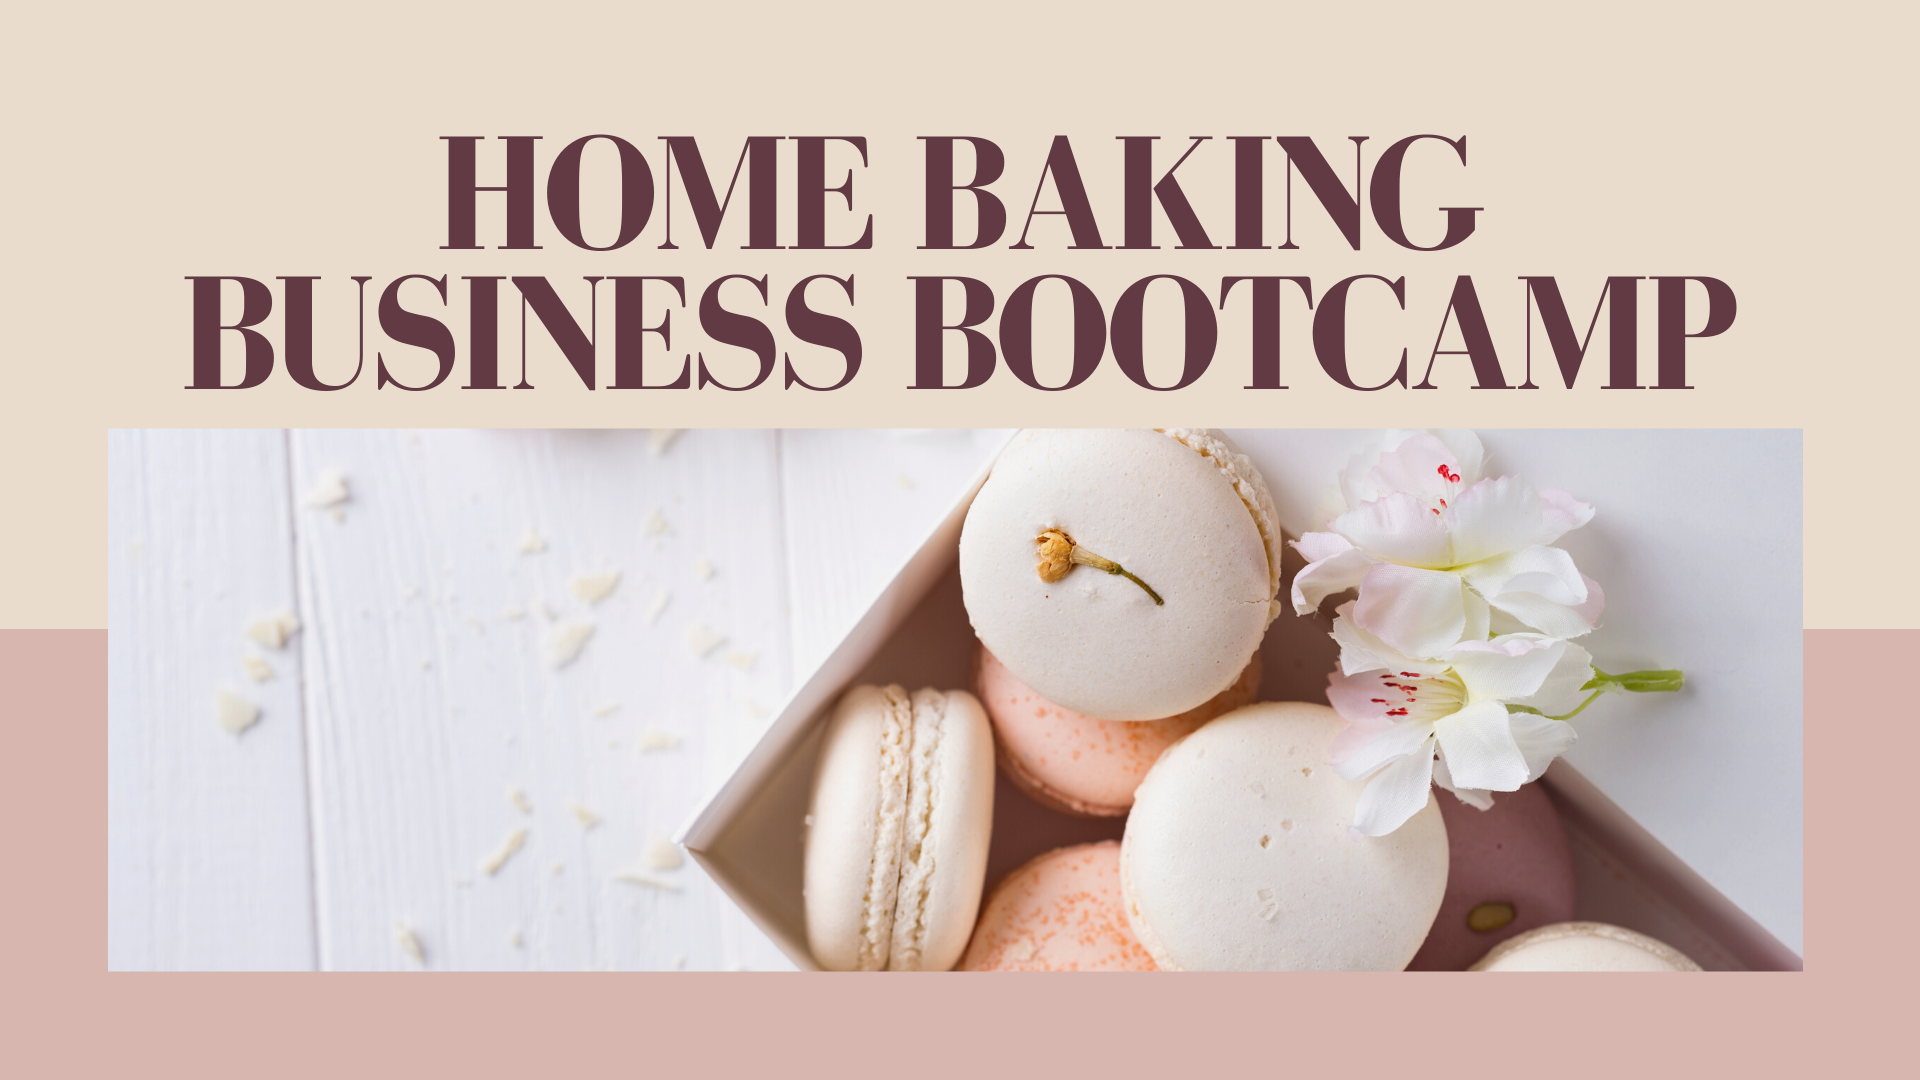 Learn how to start a profitable home baking business from the comfort of your own kitchen! Cake Design School offers online classes and resources that will help you get your business up and running in no time. Enroll now and get started on your baking career!